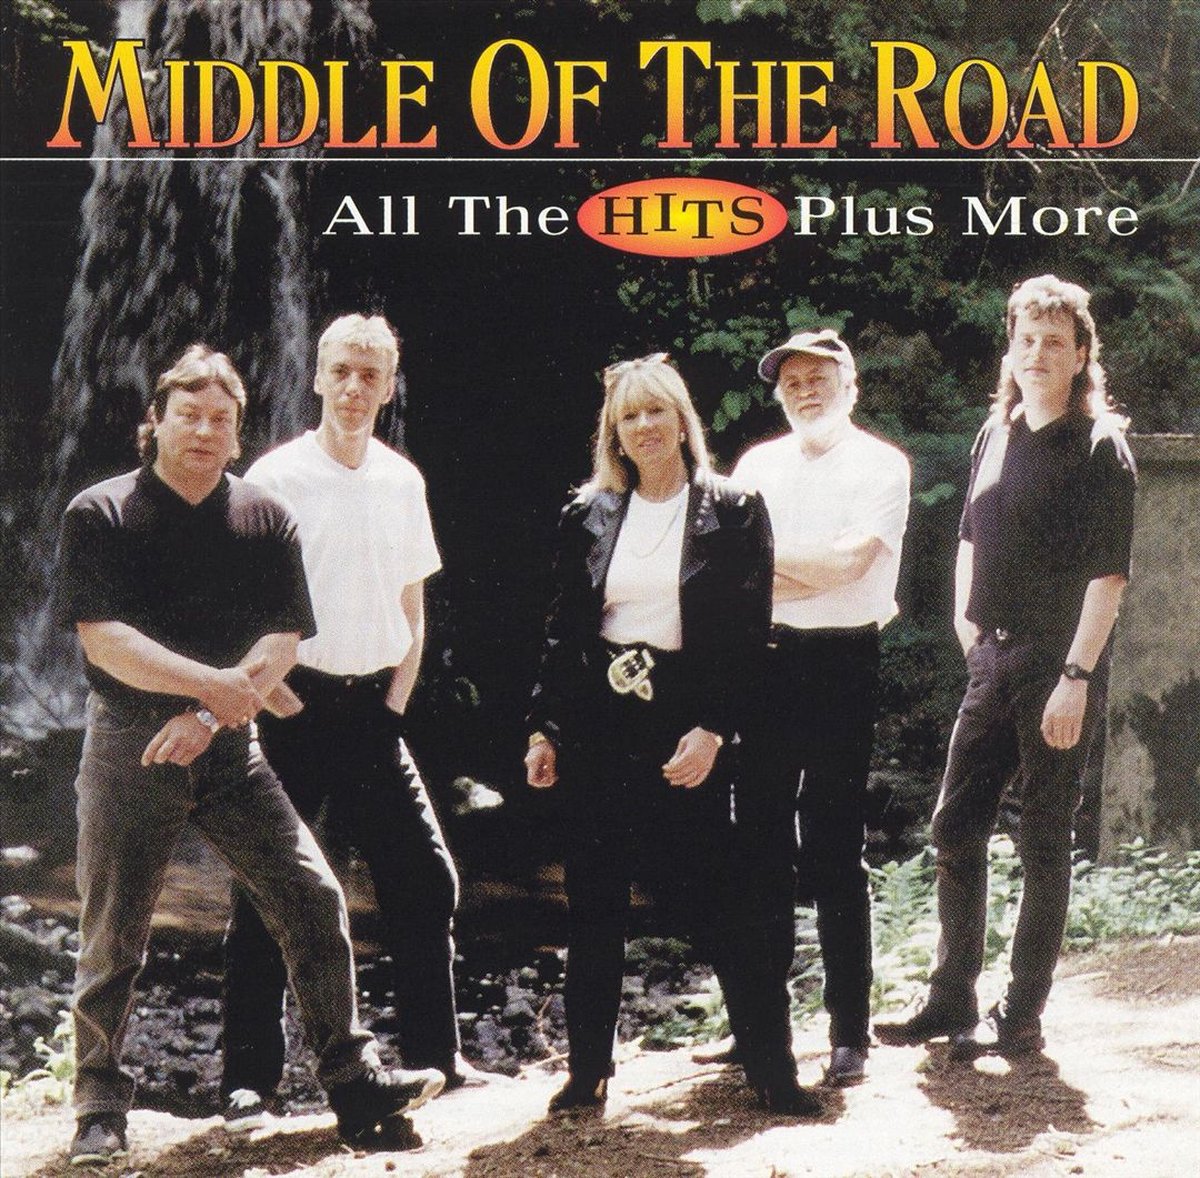 All The Hits Plus More - Middle Of The Road